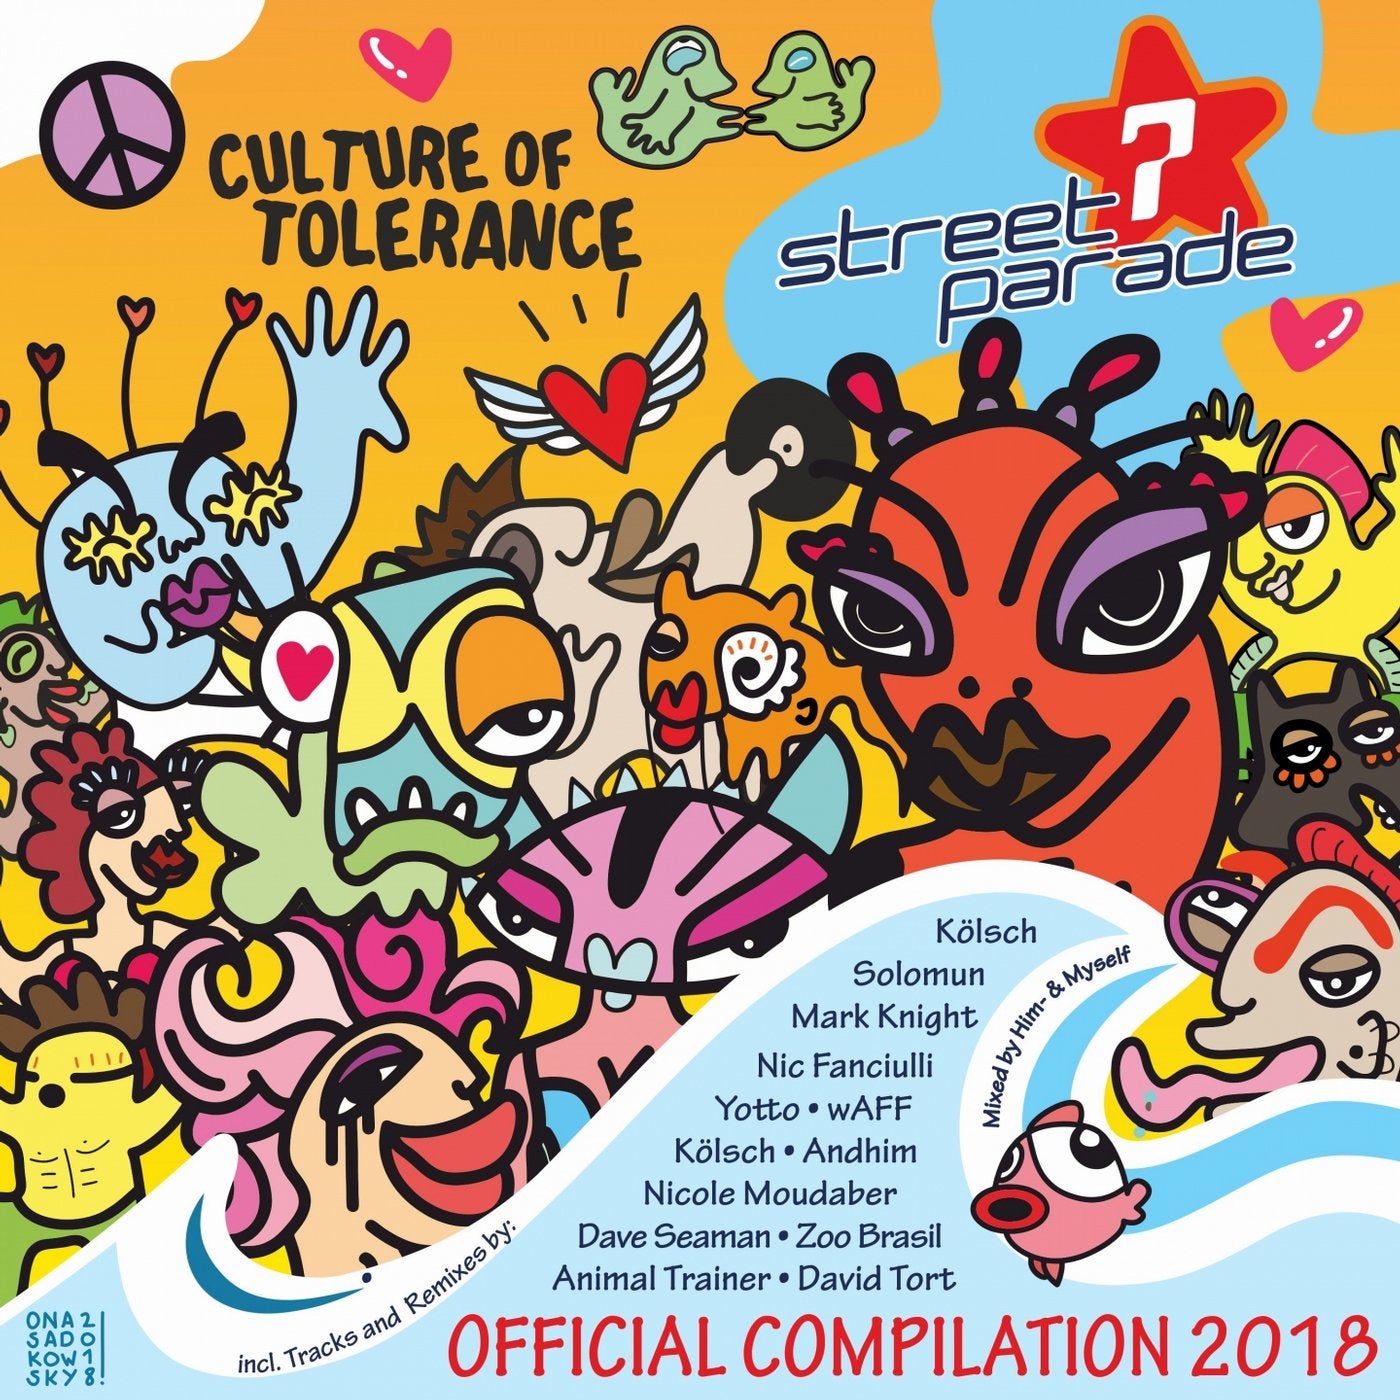 Street Parade 2018 Official Compilation (Compiled by Himself & Myself) (Culture of Tolerance)